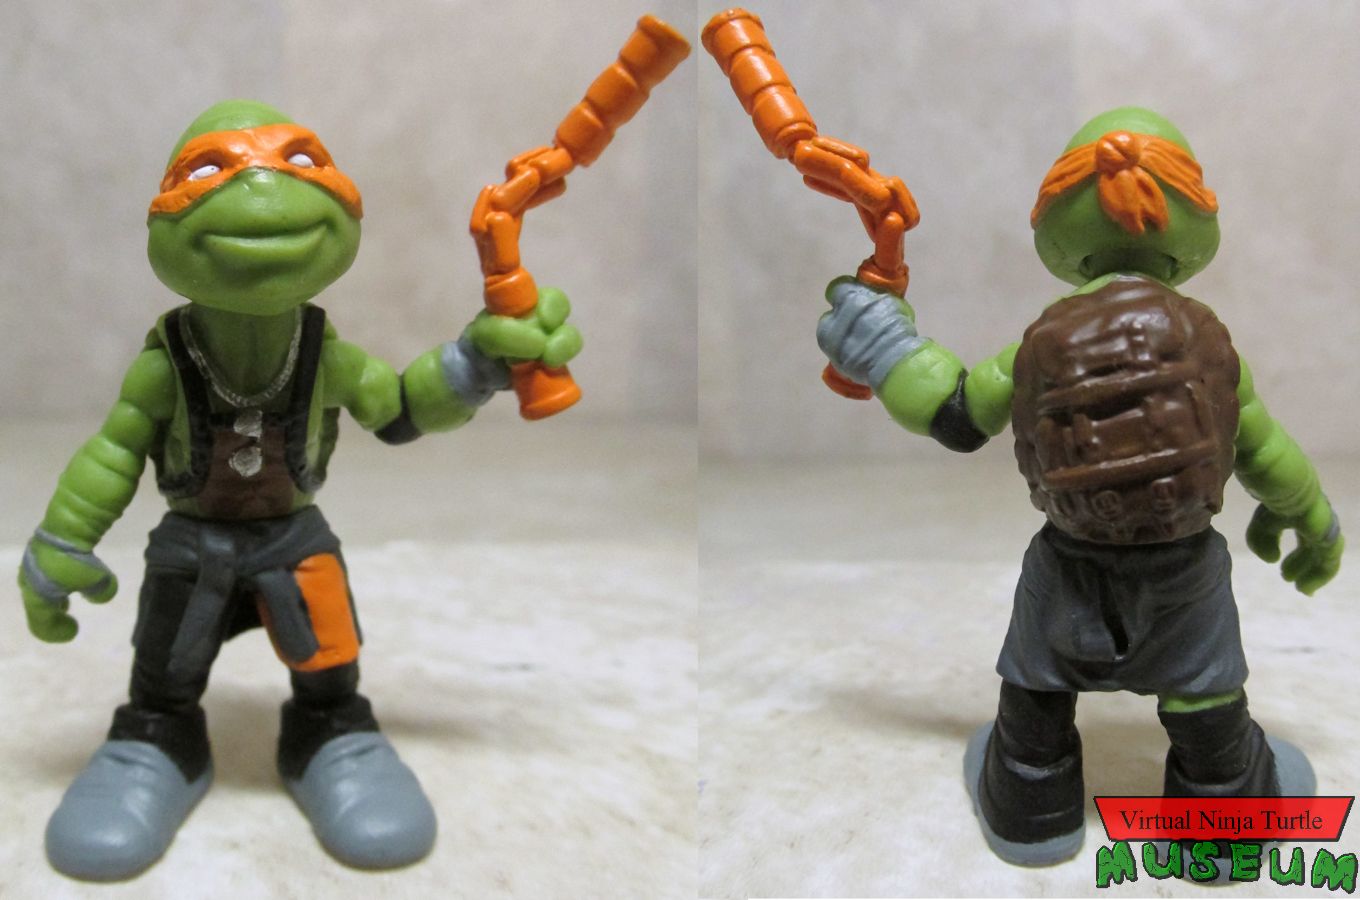 OotS Michelangelo front and back